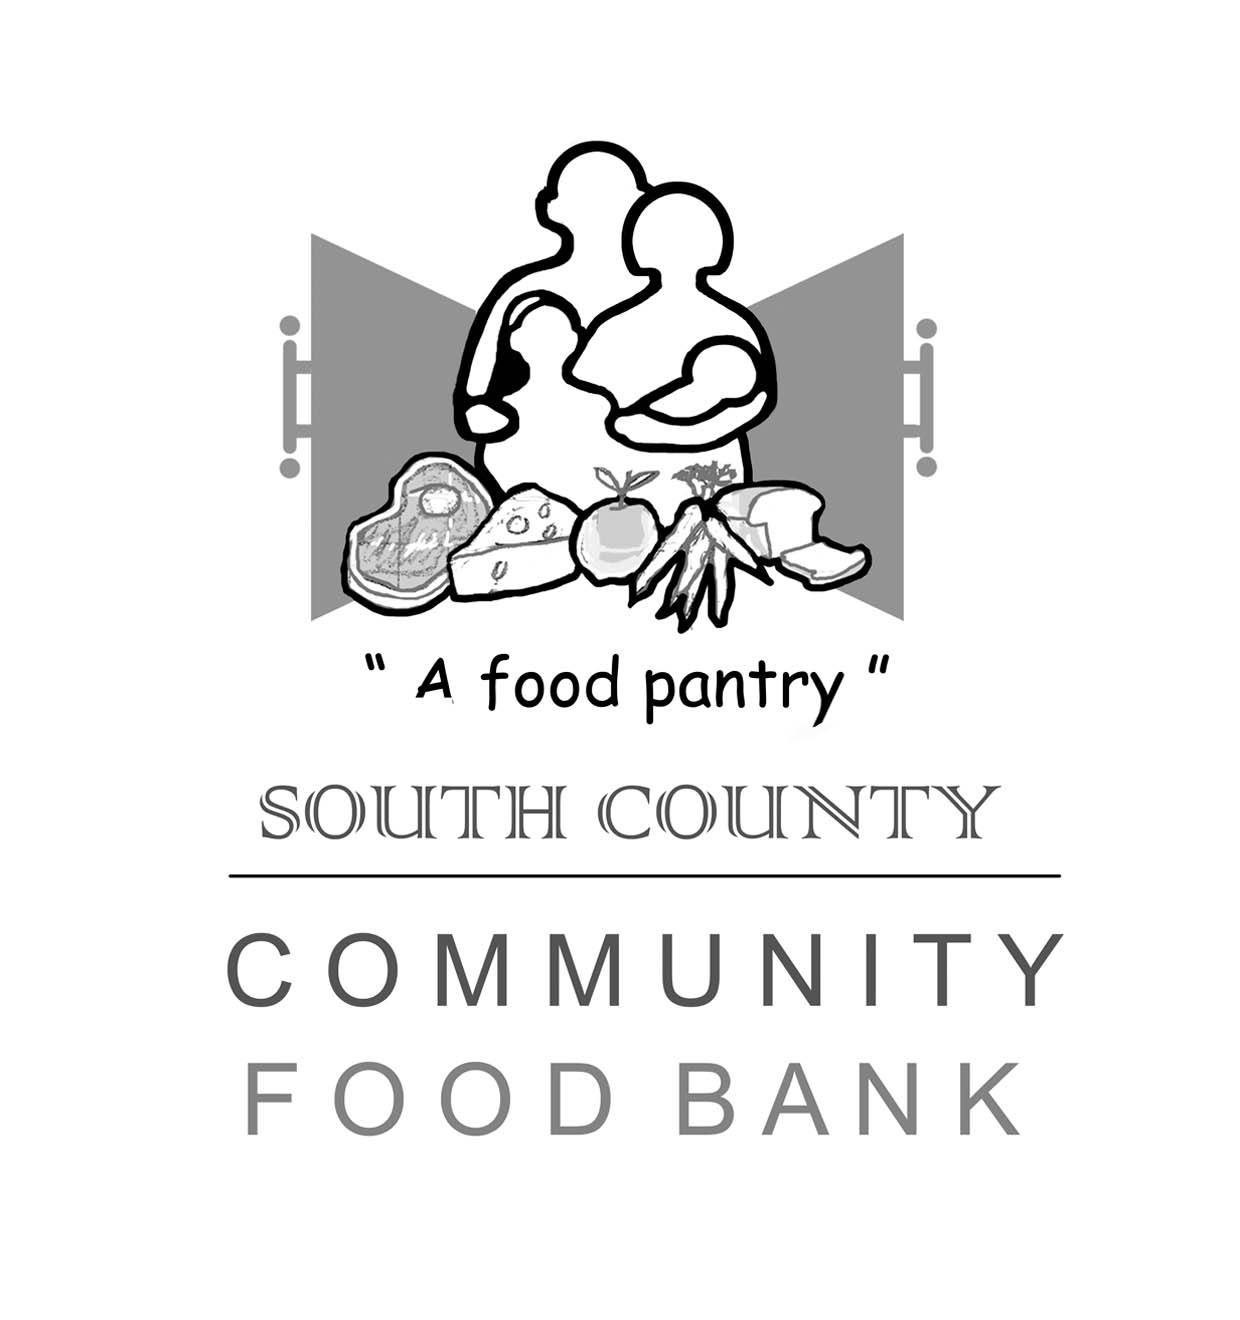 South County Community Food Bank